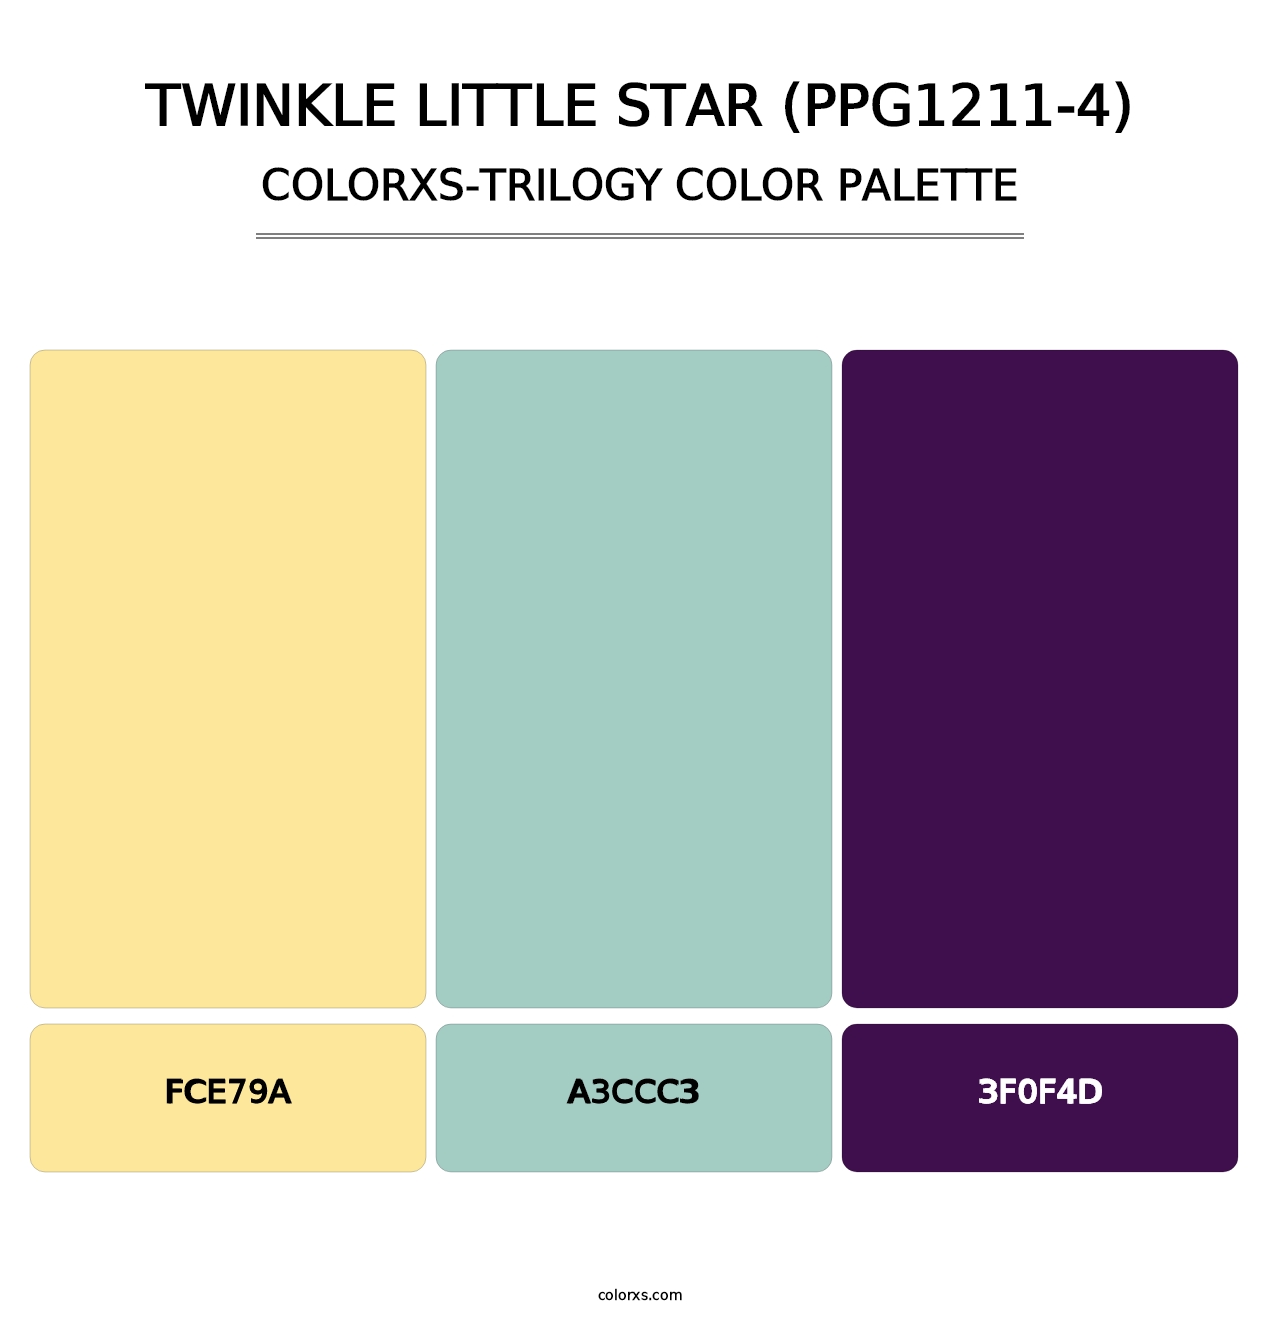 Twinkle Little Star (PPG1211-4) - Colorxs Trilogy Palette